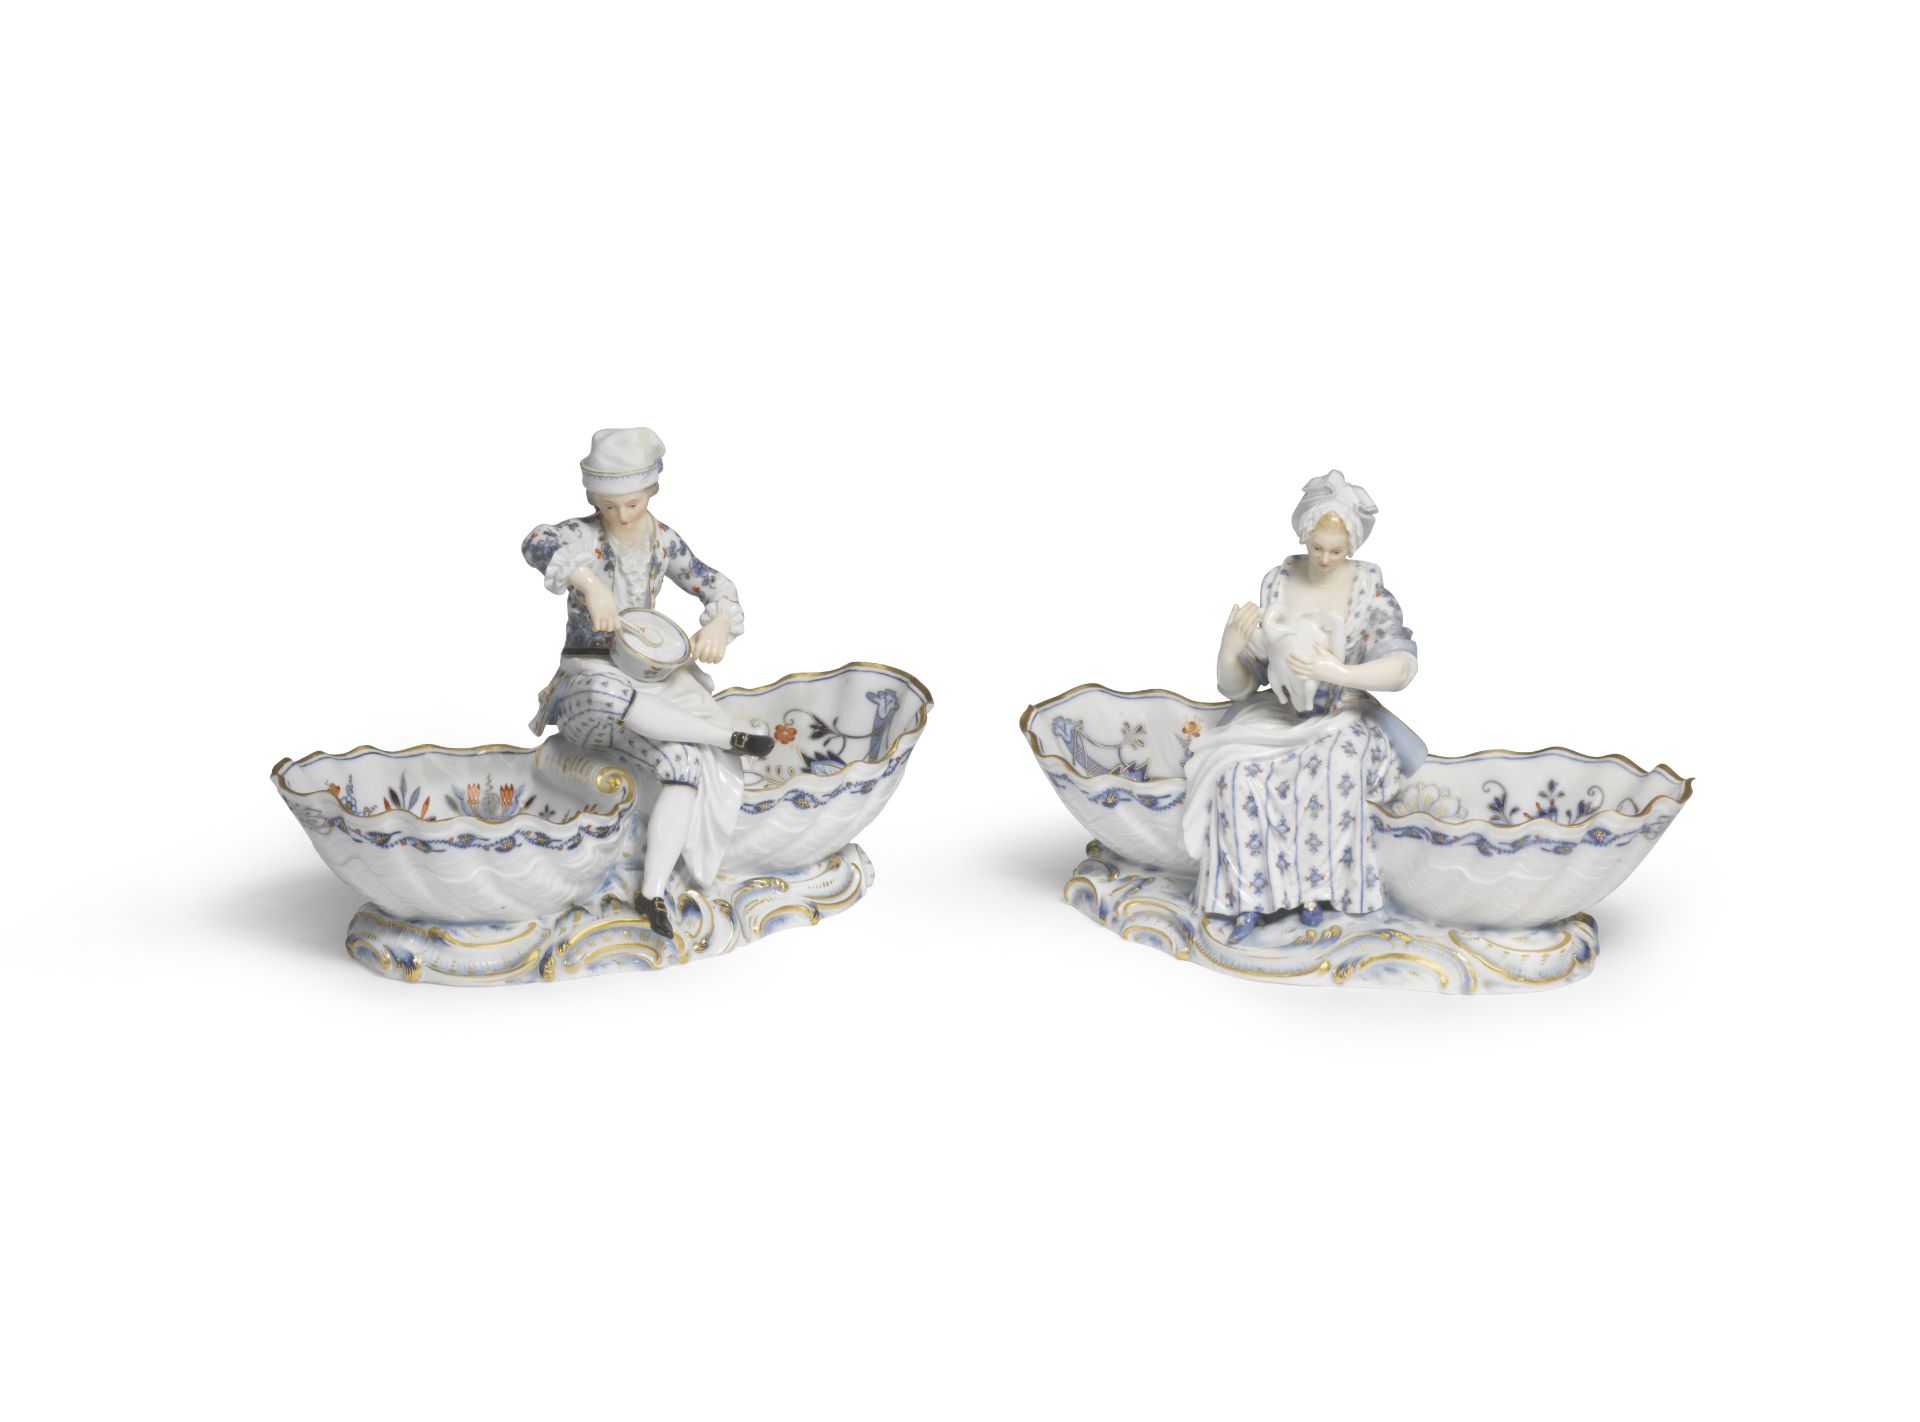 A pair of large Meissen figural salts, late 19th century